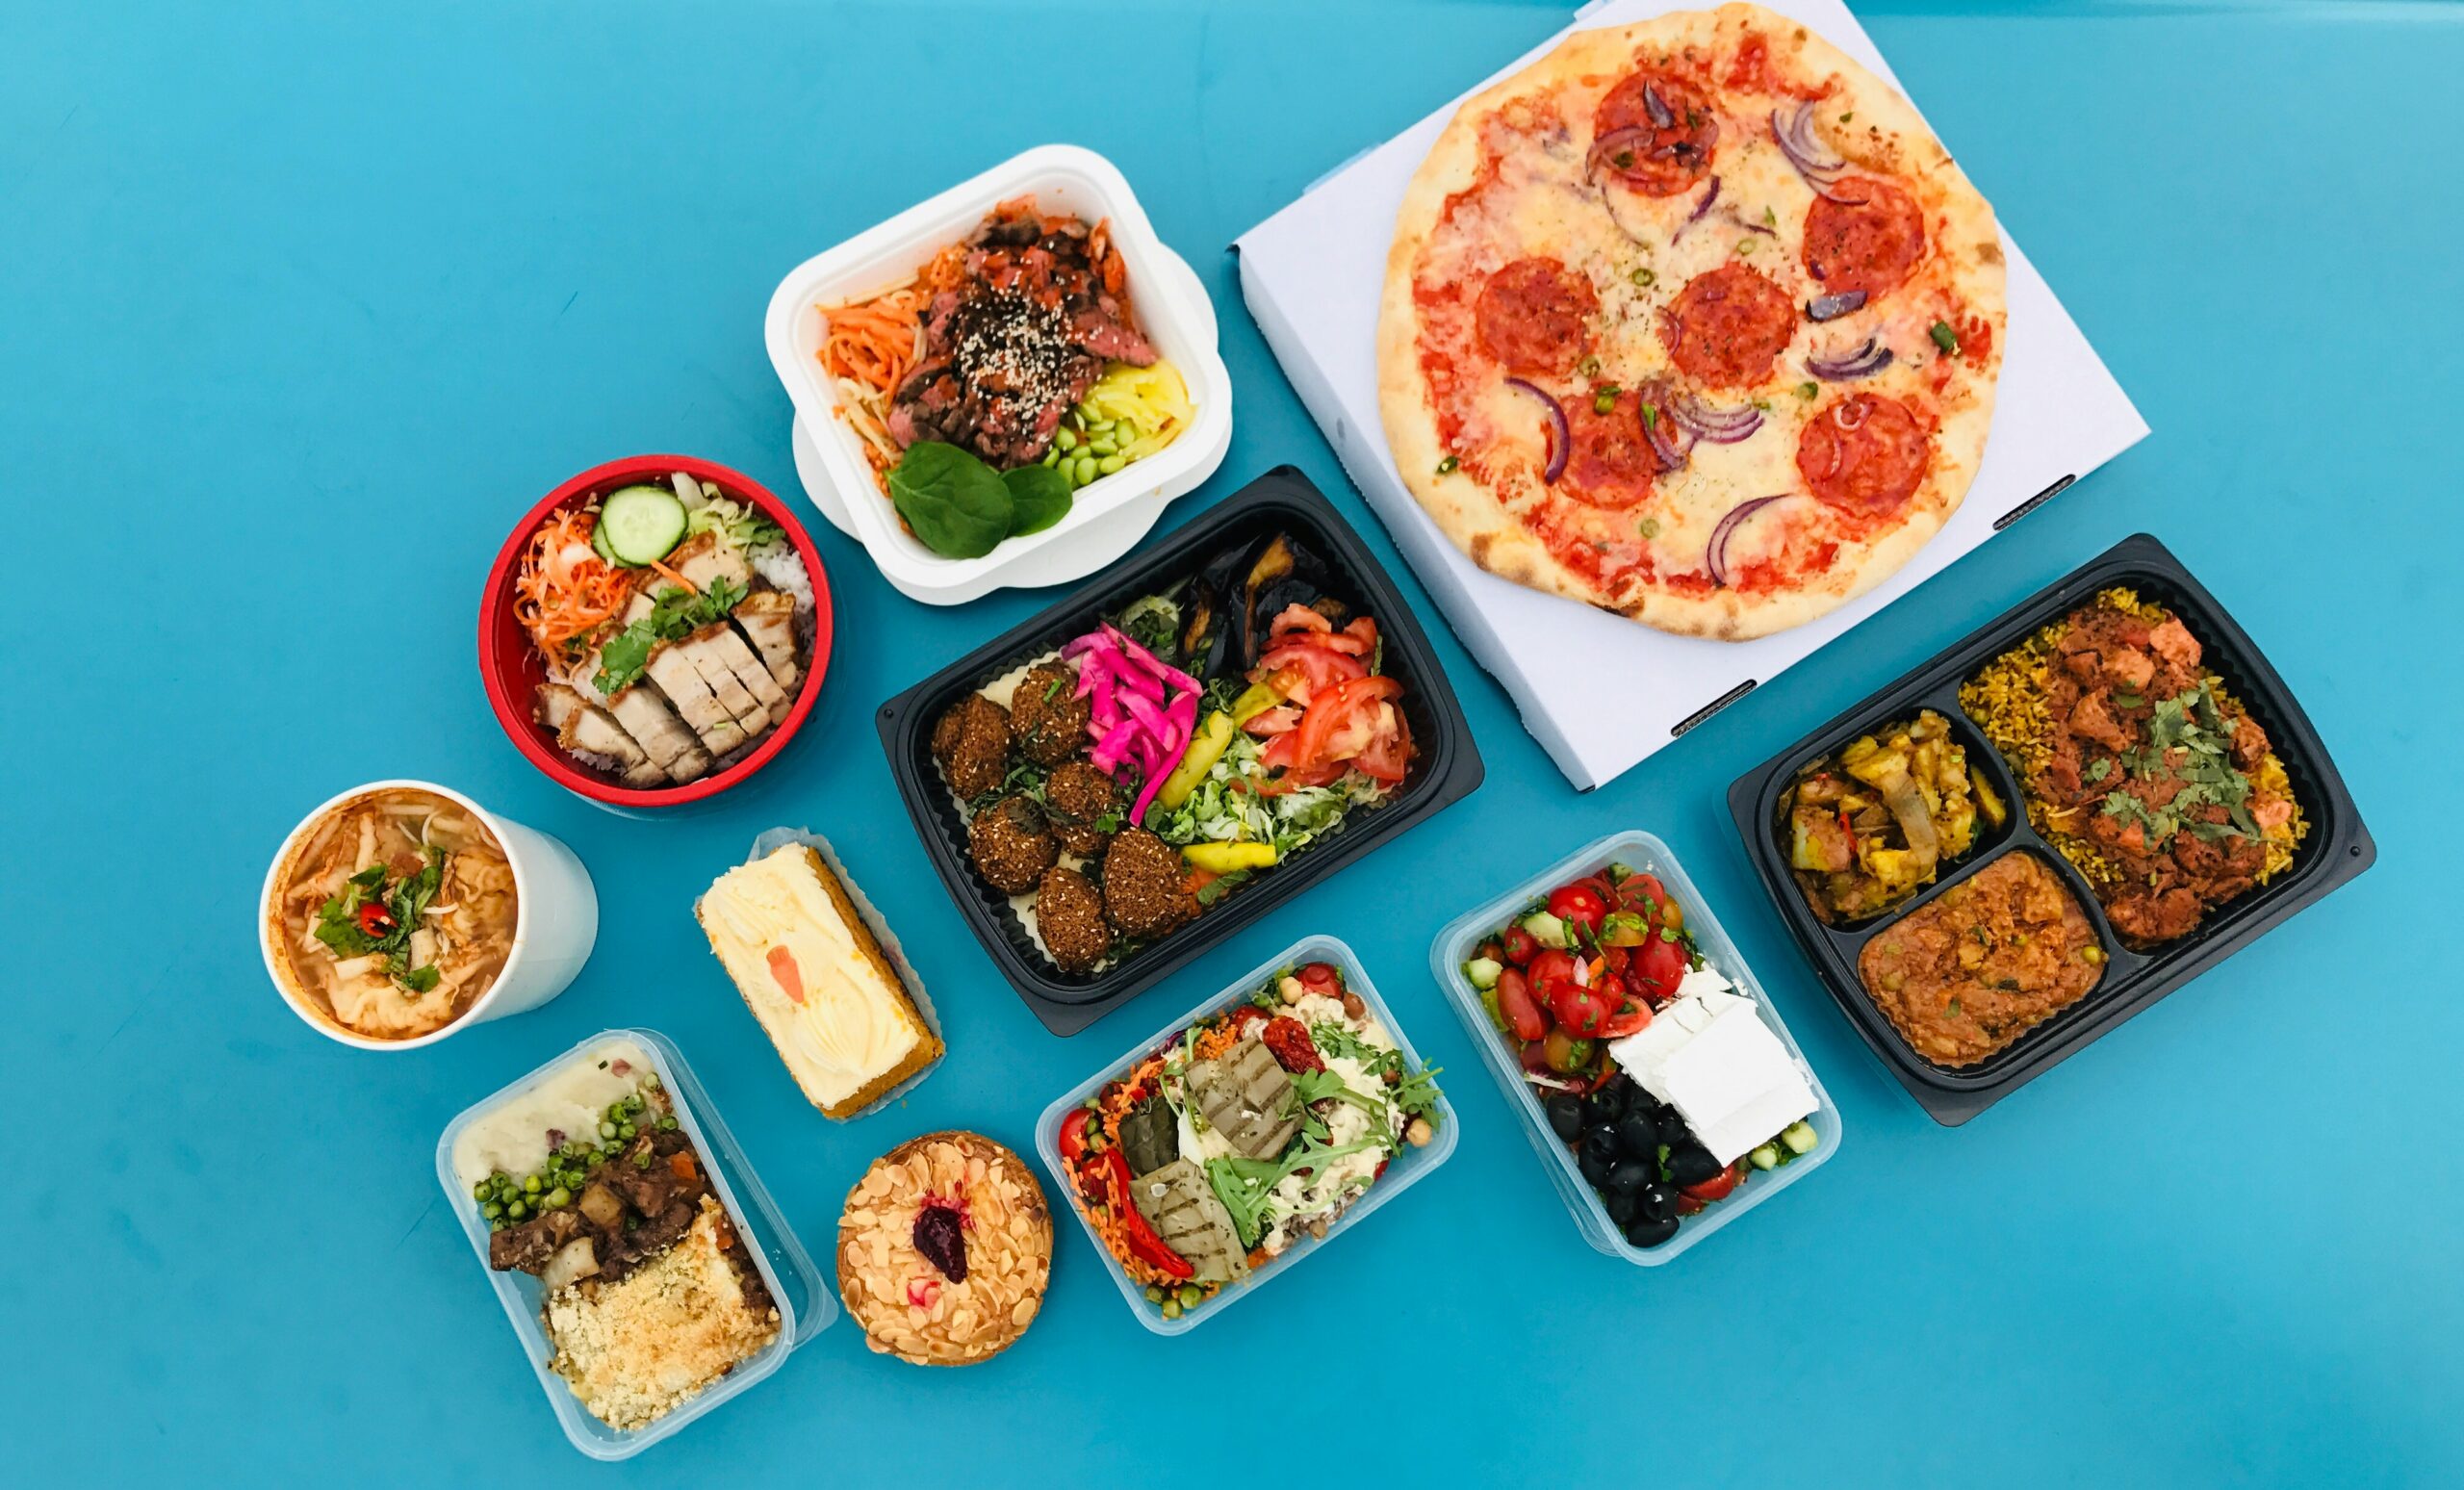 Cash on Delivery The 8 Best Food Delivery Services for Earning Extra Dough